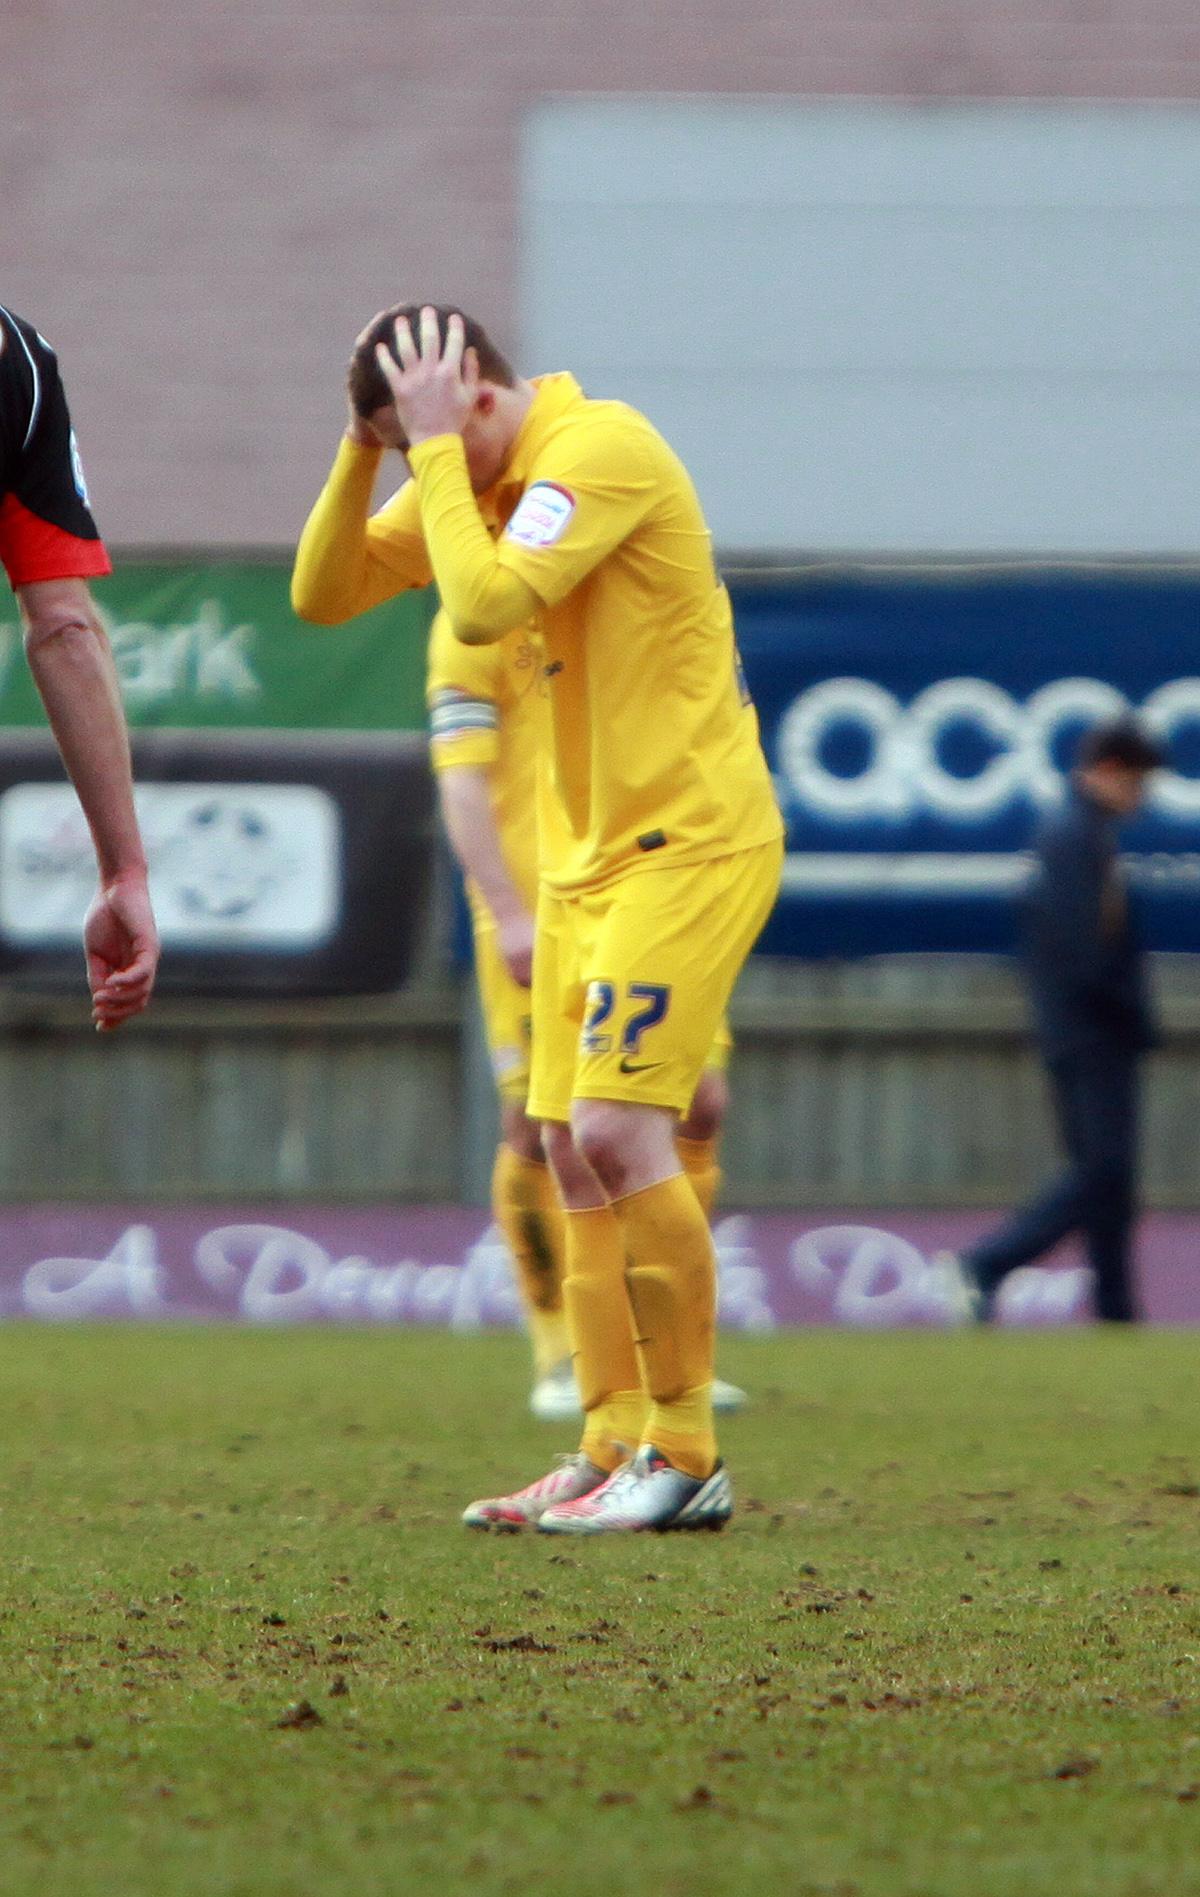 Oxford United were hit by a body-blow as Morecambe scored with just seconds remaining to claim a share of the points. 